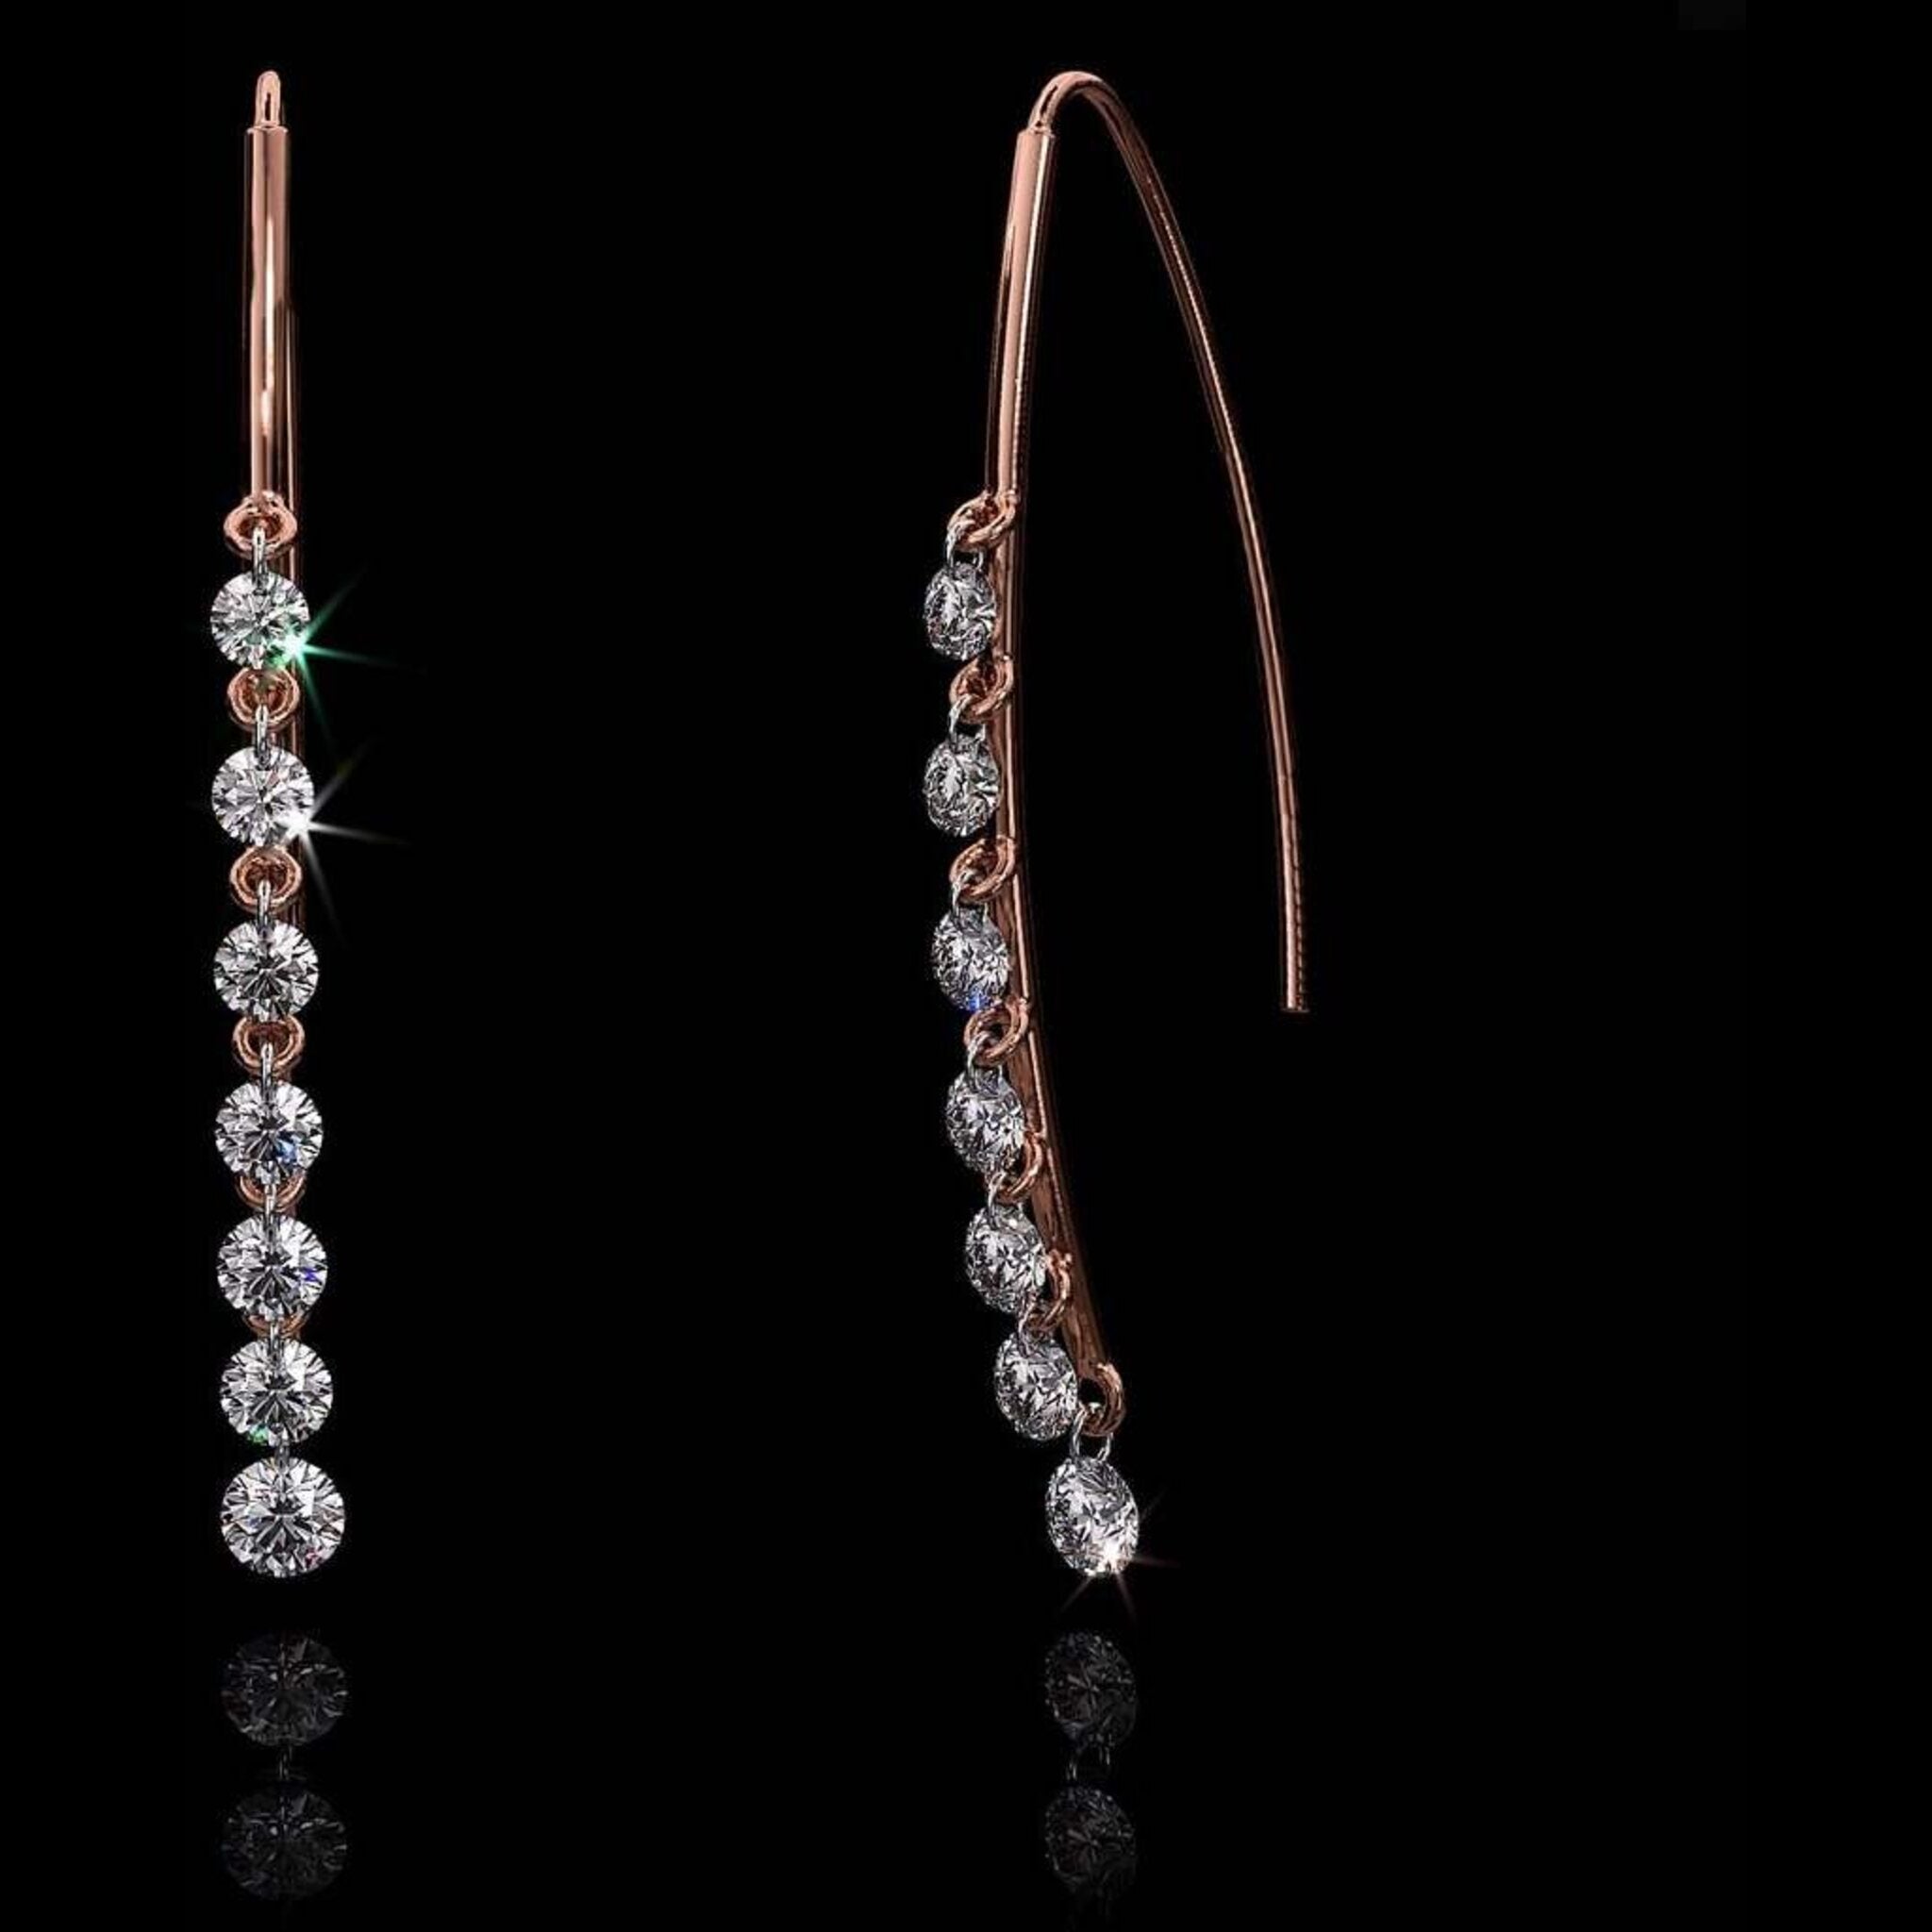 Aresa New York - Deren No. 7 Earrings - 18K Rose Gold with 0.95 cts. of Diamonds